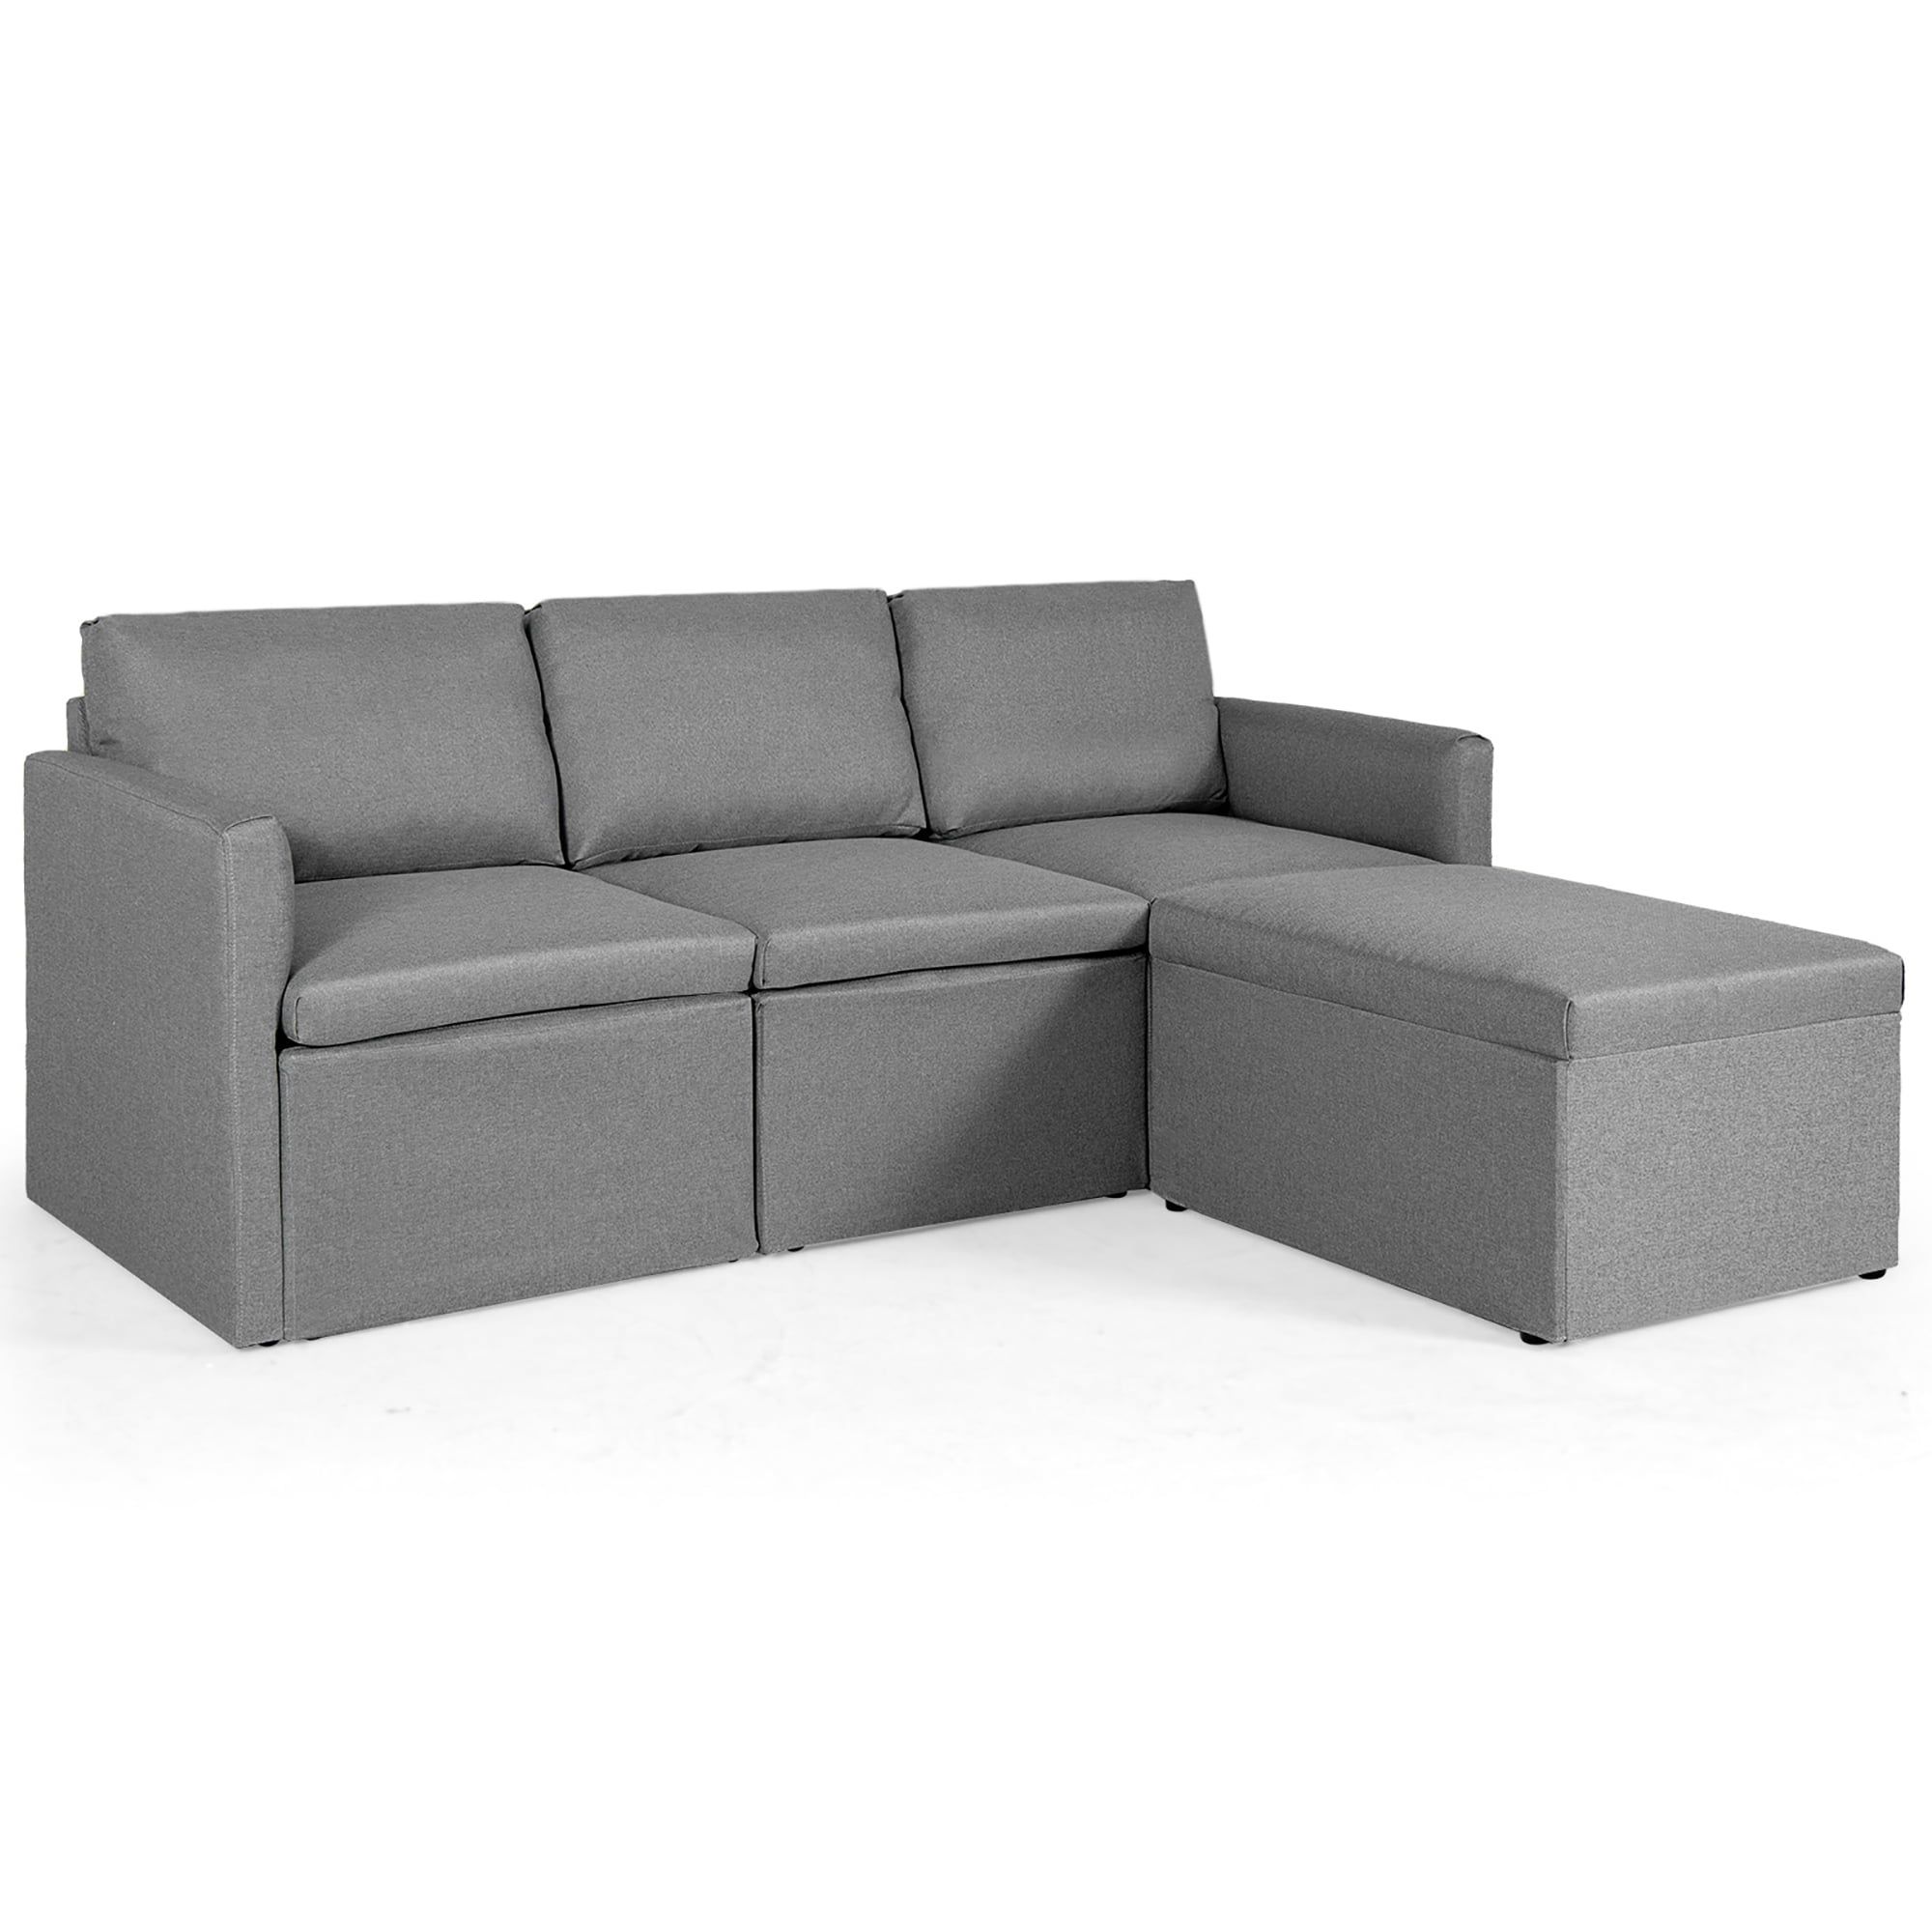 Costway Convertible Sectional Sofa L Shaped Couch W/reversible Chaise With L Shape Couches With Reversible Chaises (Gallery 19 of 20)